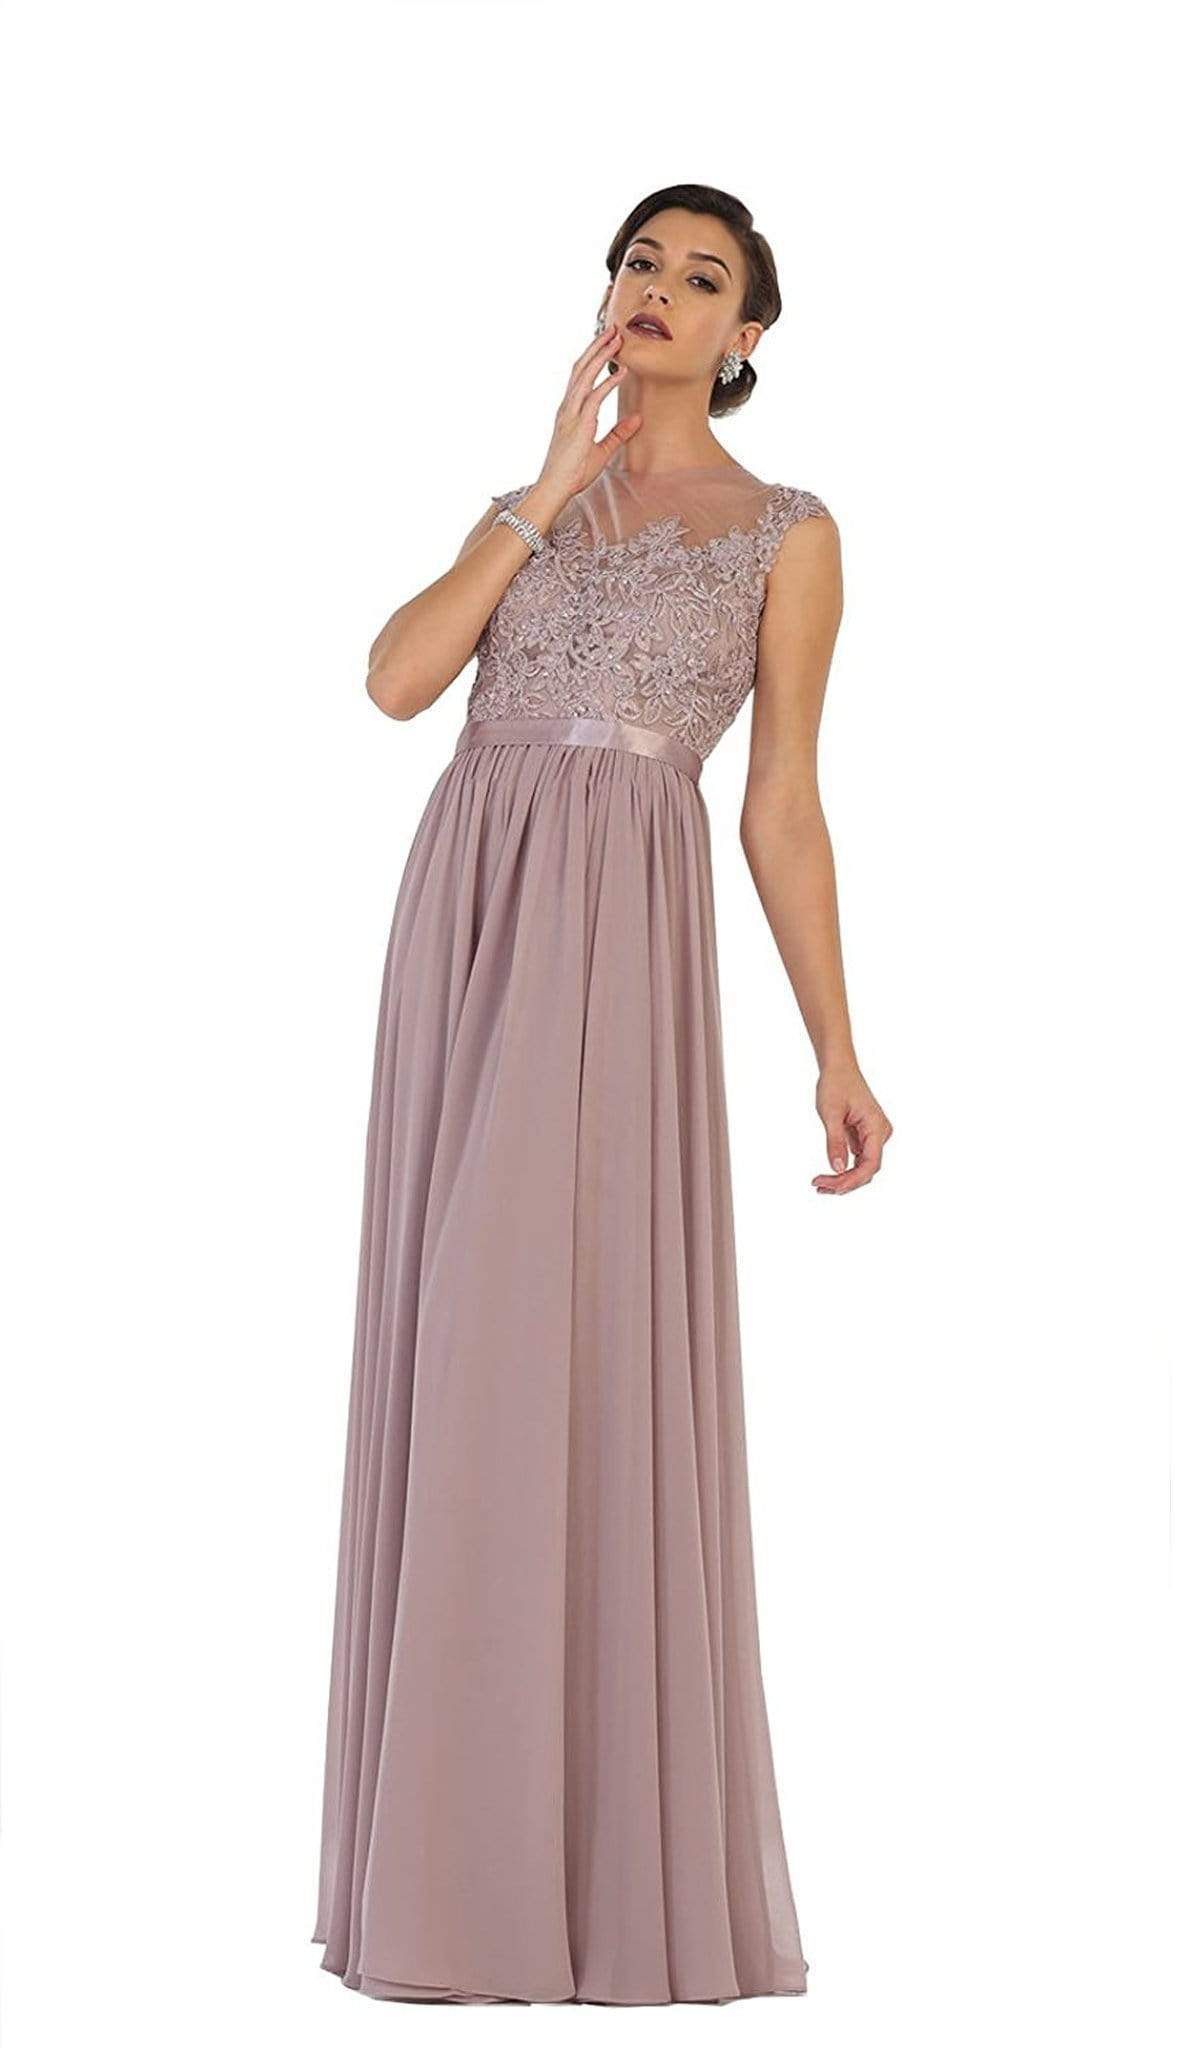 May Queen - Dainty Cap Sleeve Lace Applique Illusion Prom Gown
